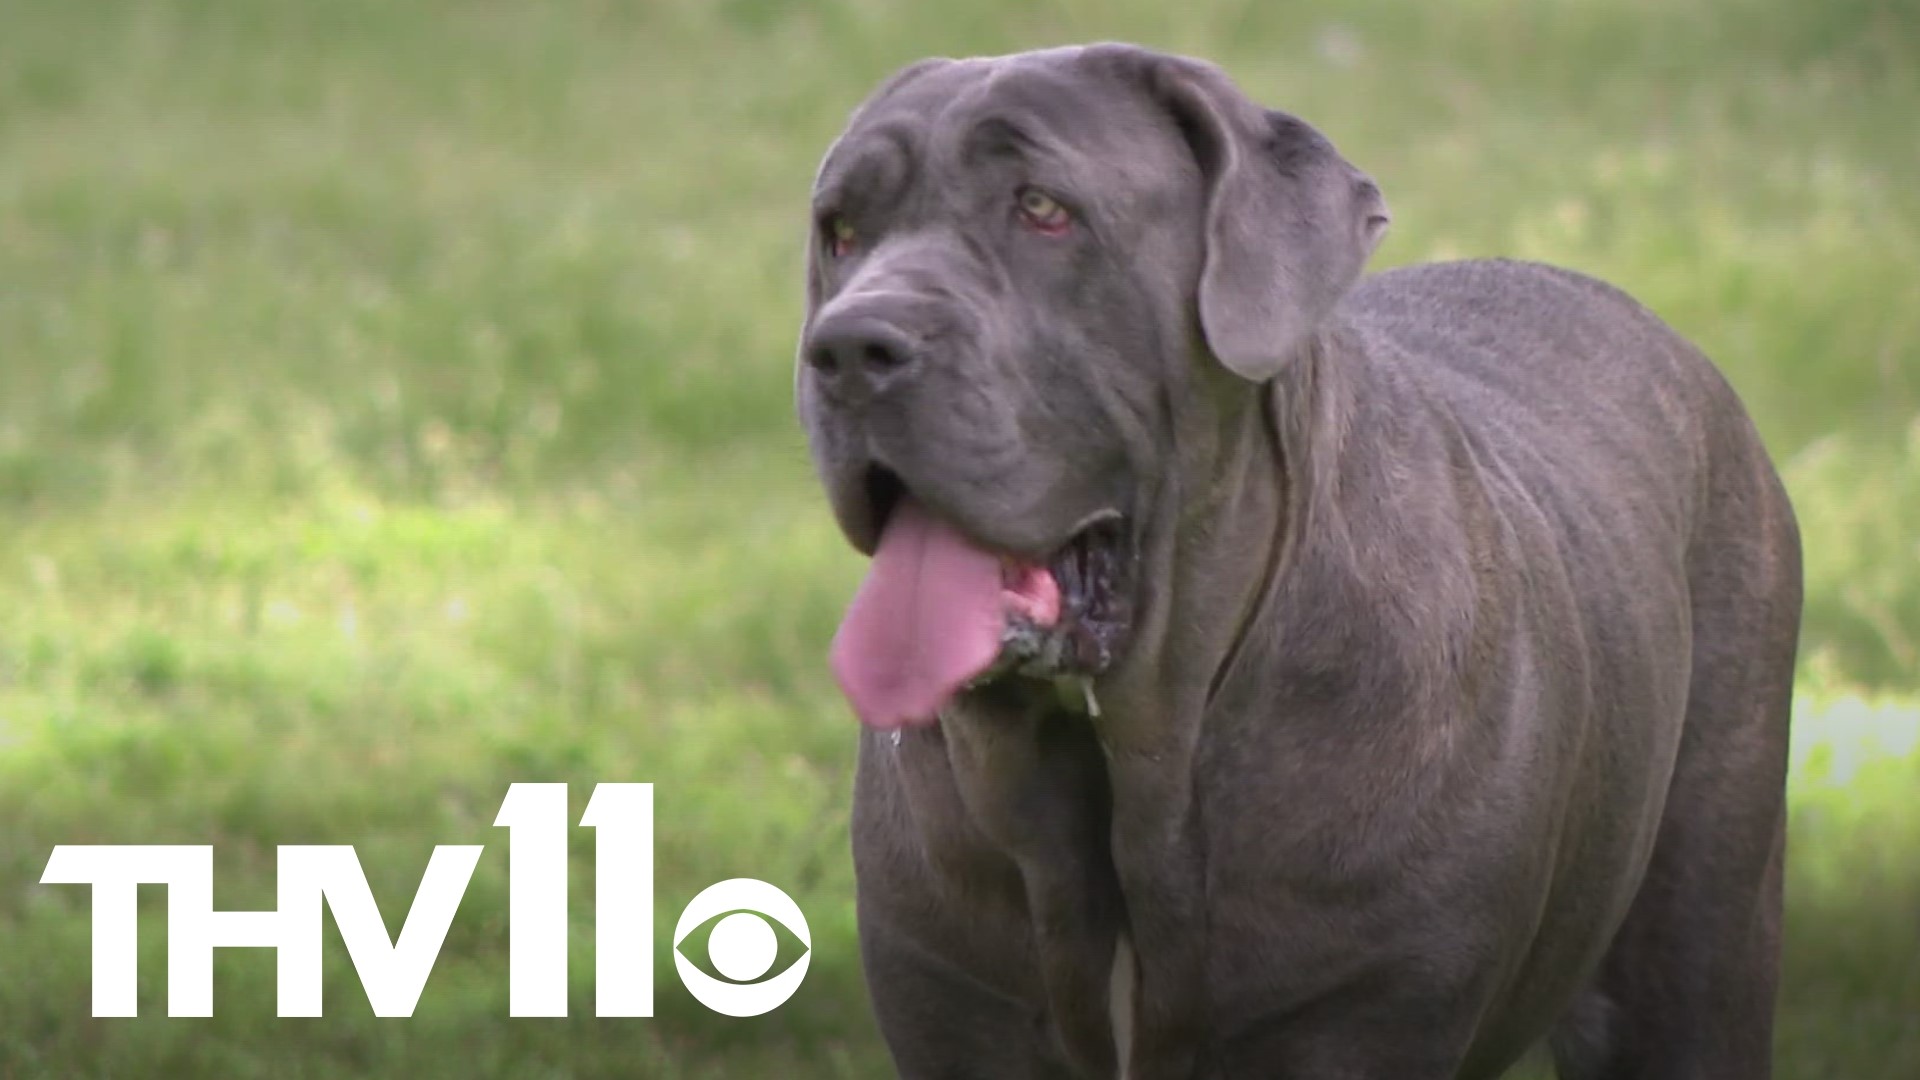 The Neapolitan Mastiff was brought to the shelter on March 30, and the shelter manager believes the dog has an owner.